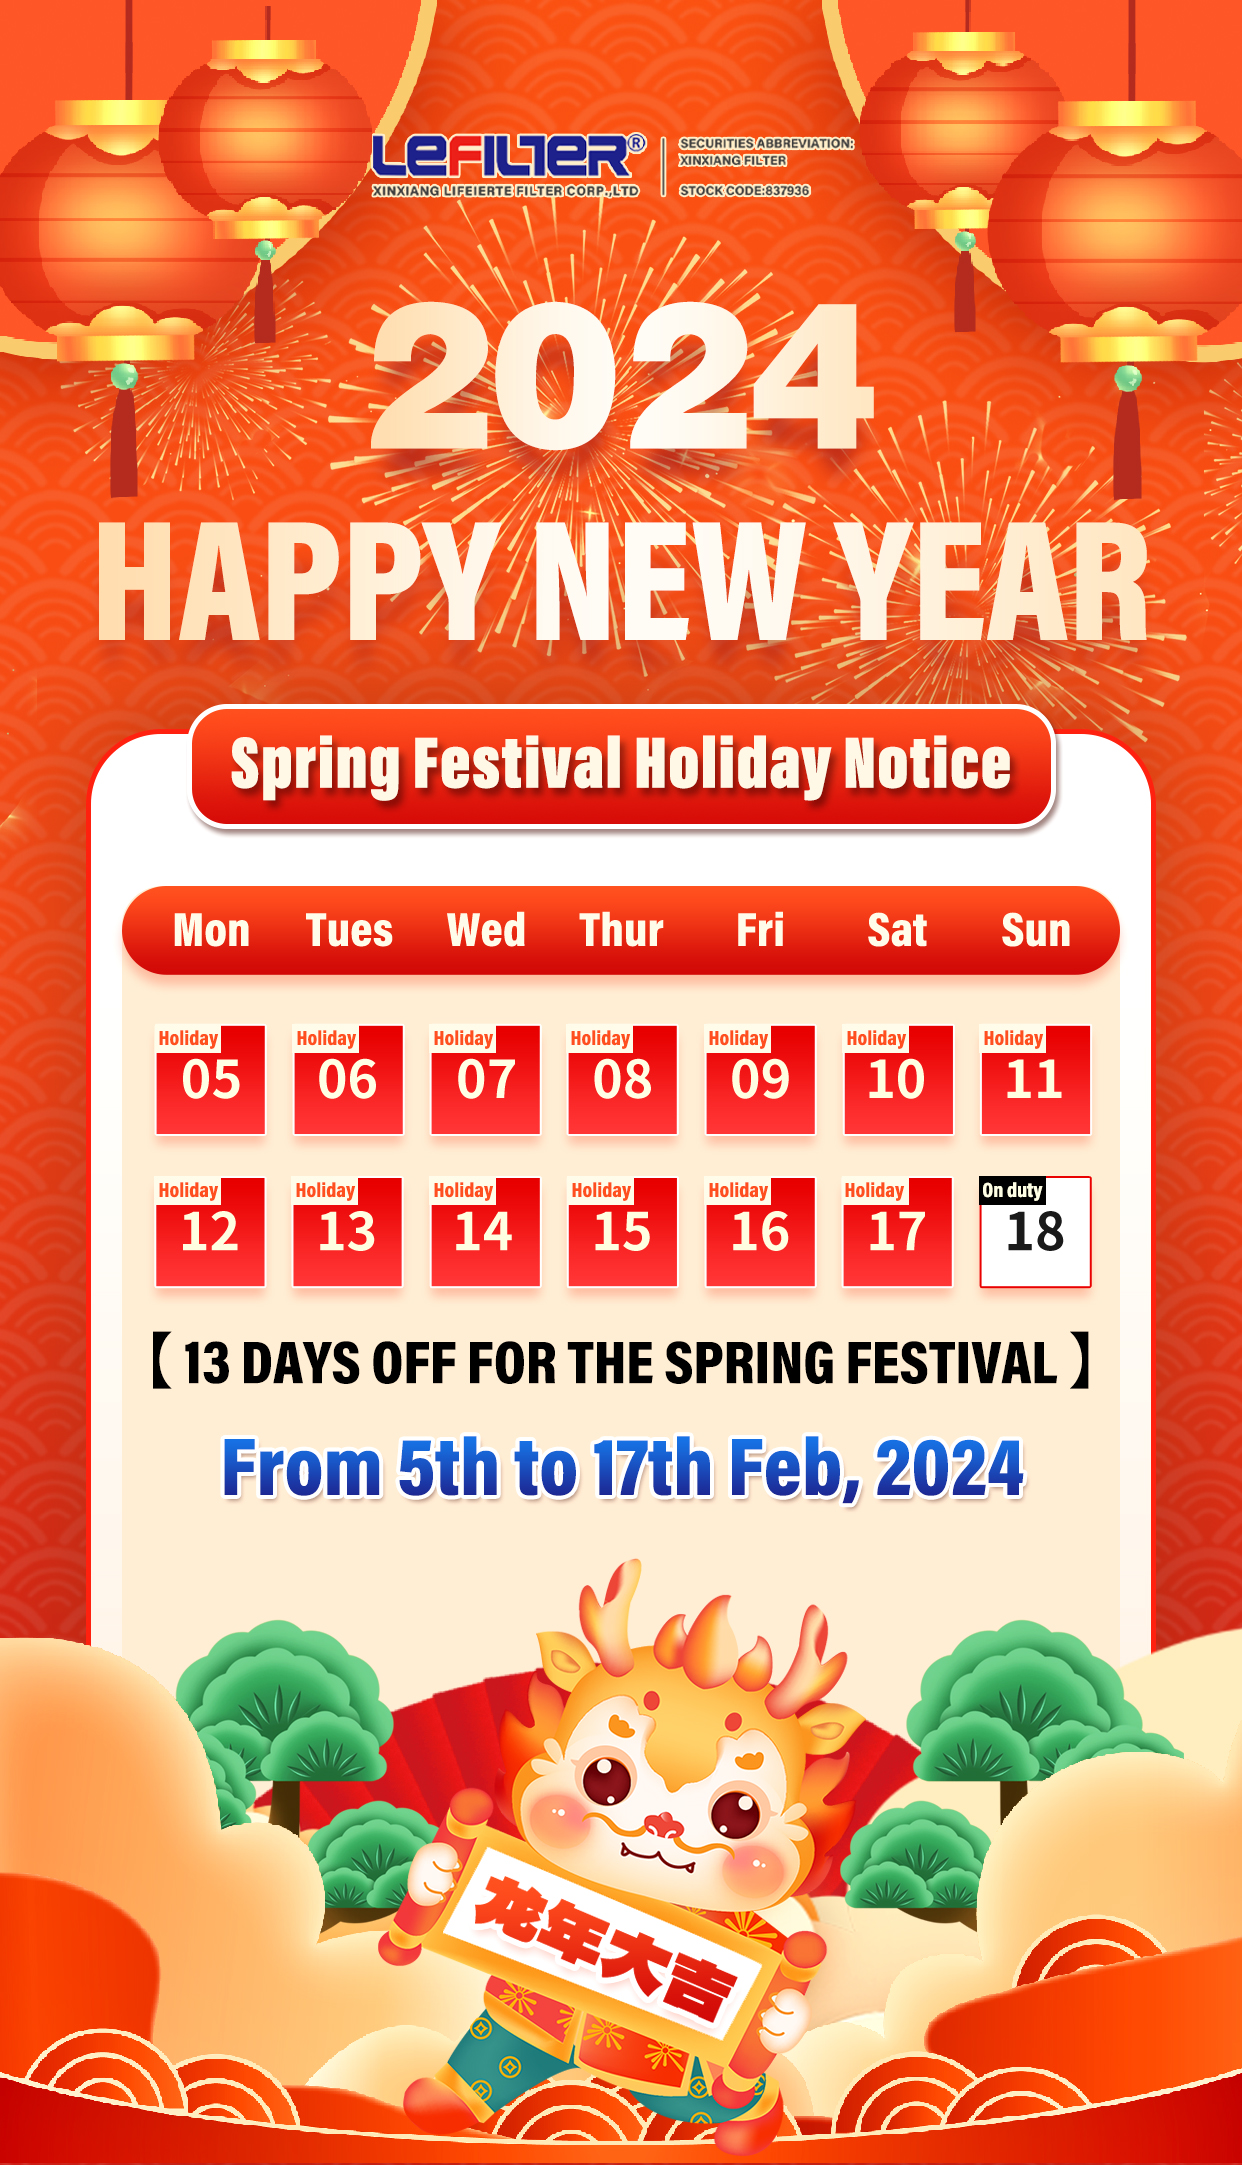 Spring holiday notice in China